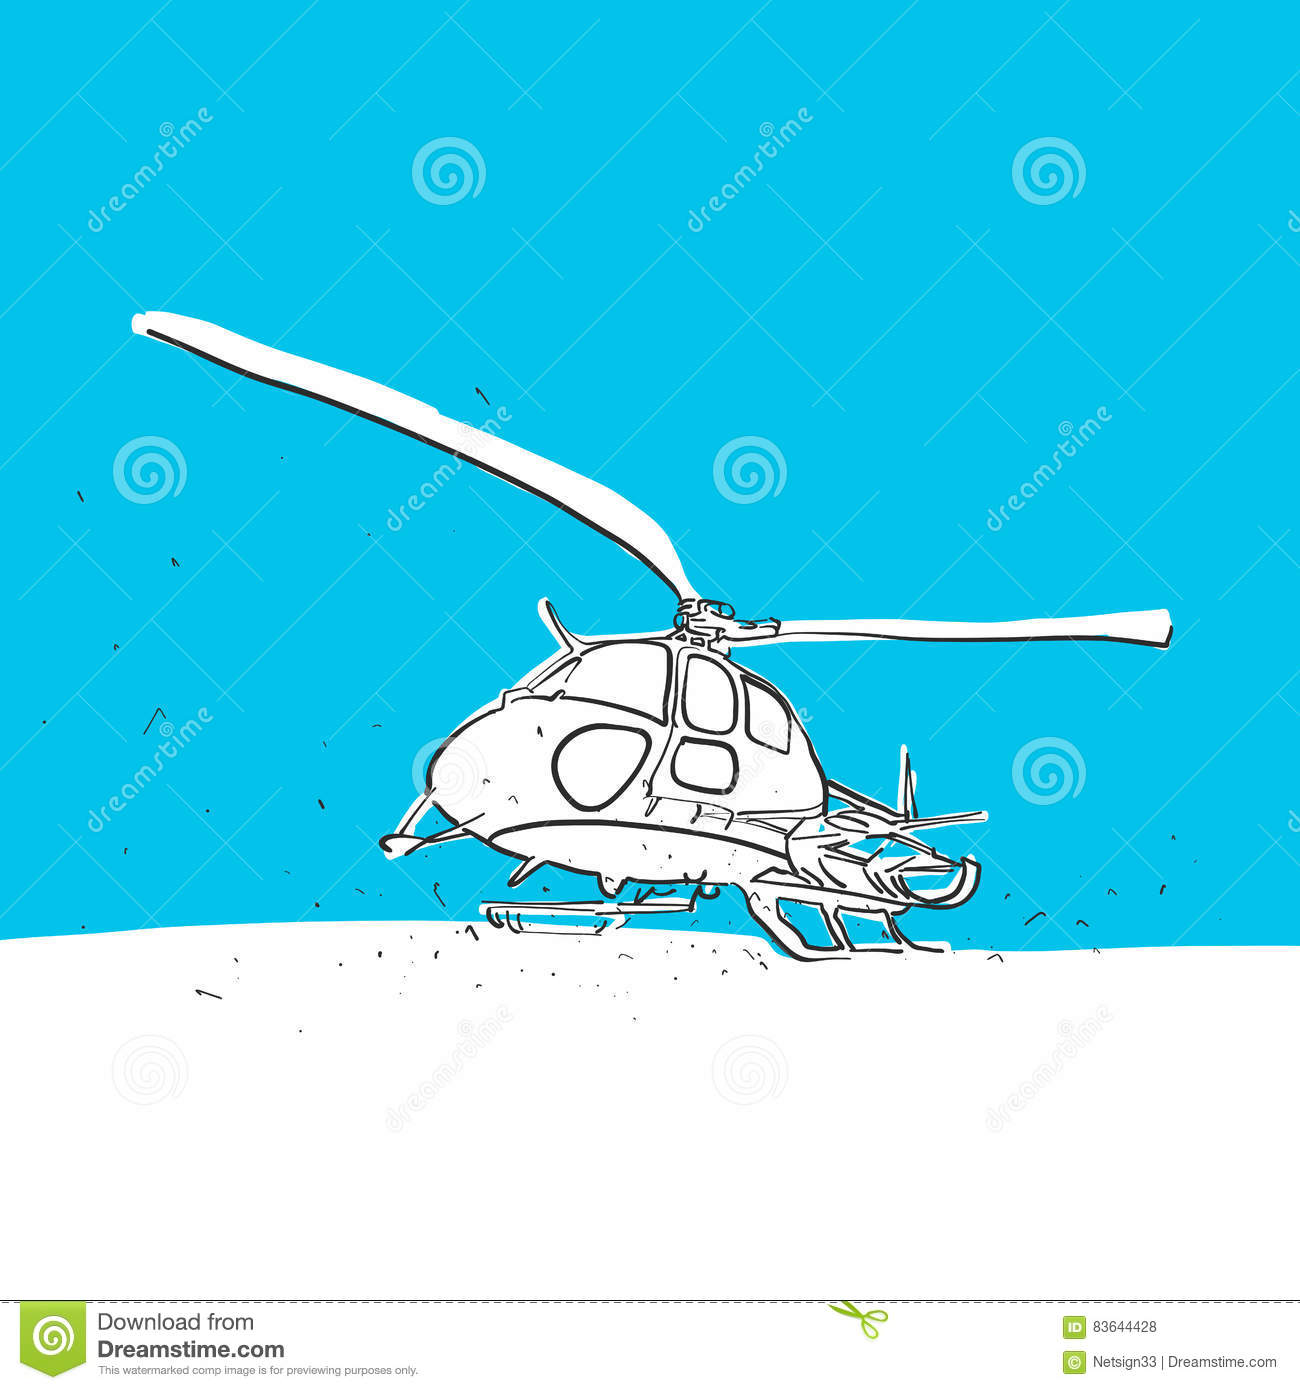 Helicopter Sketch, Low Perspective, Blue Series Stock Vector.